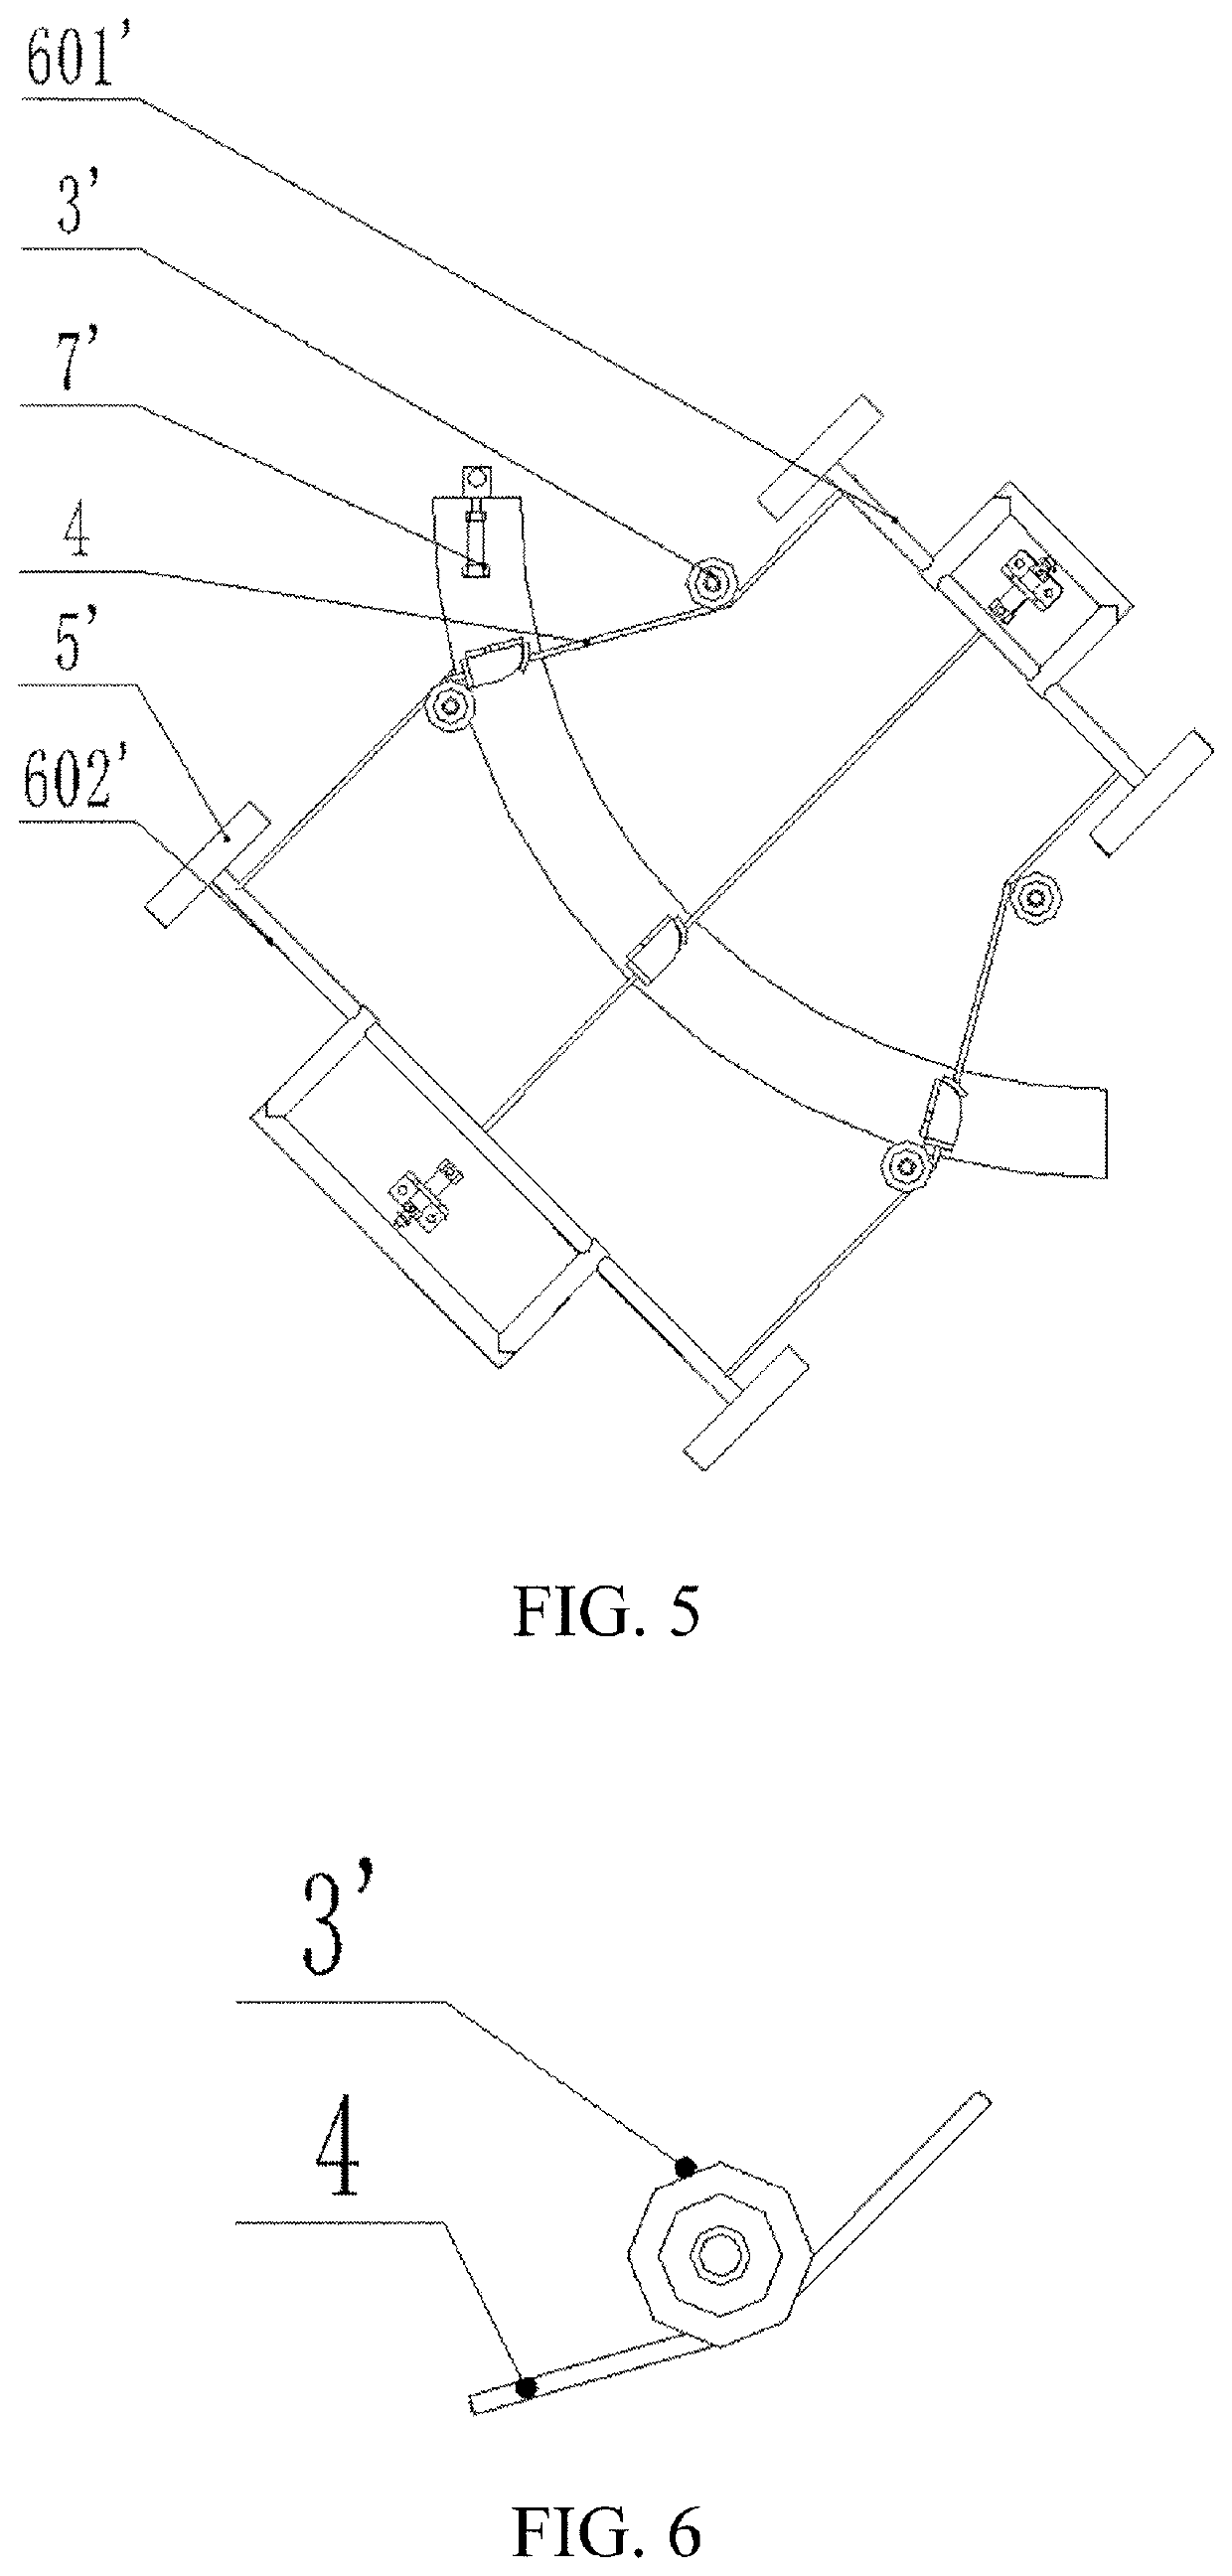 Threshing Device with Two-Way Pull Wires and Adjustable Threshing Clearance and Combined Harvester